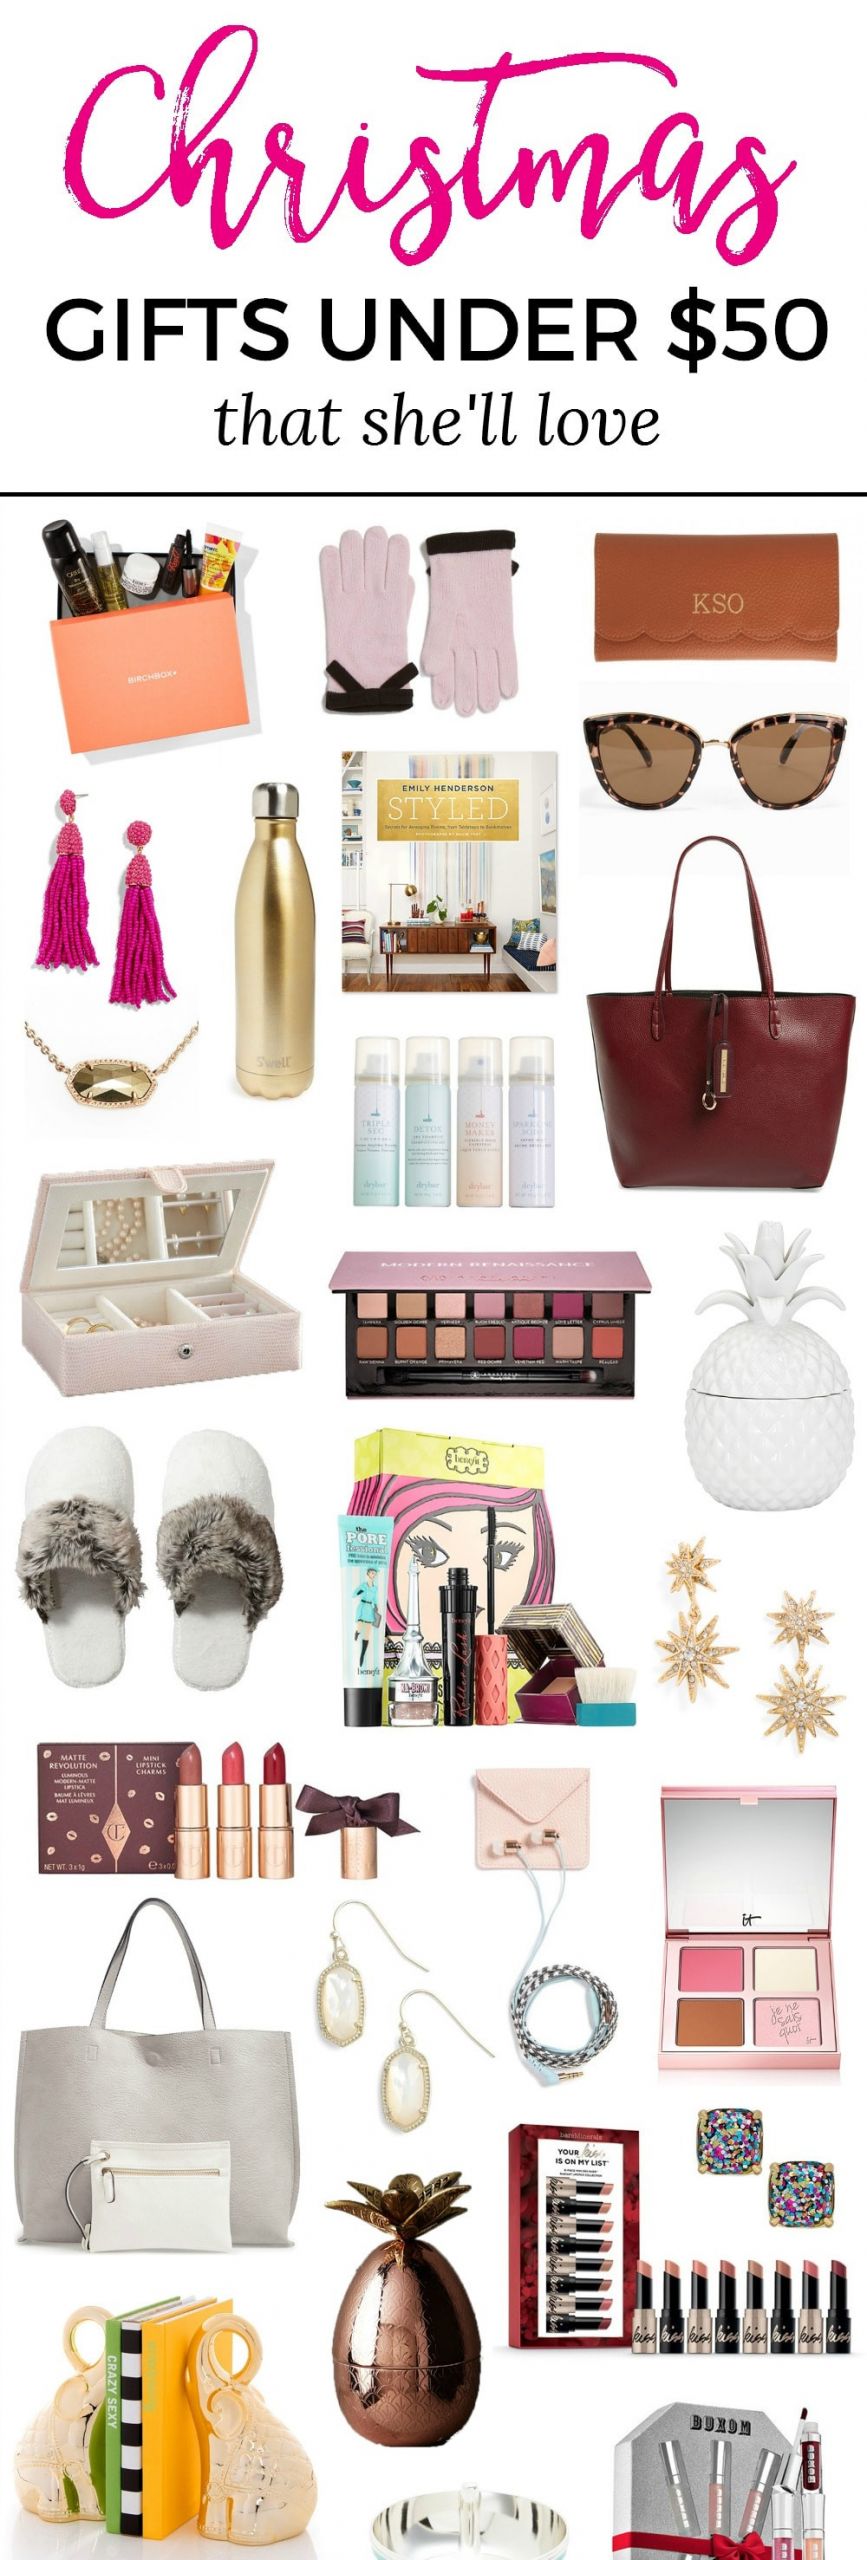 Womens Birthday Gifts
 The Best Christmas Gift Ideas for Women under $50